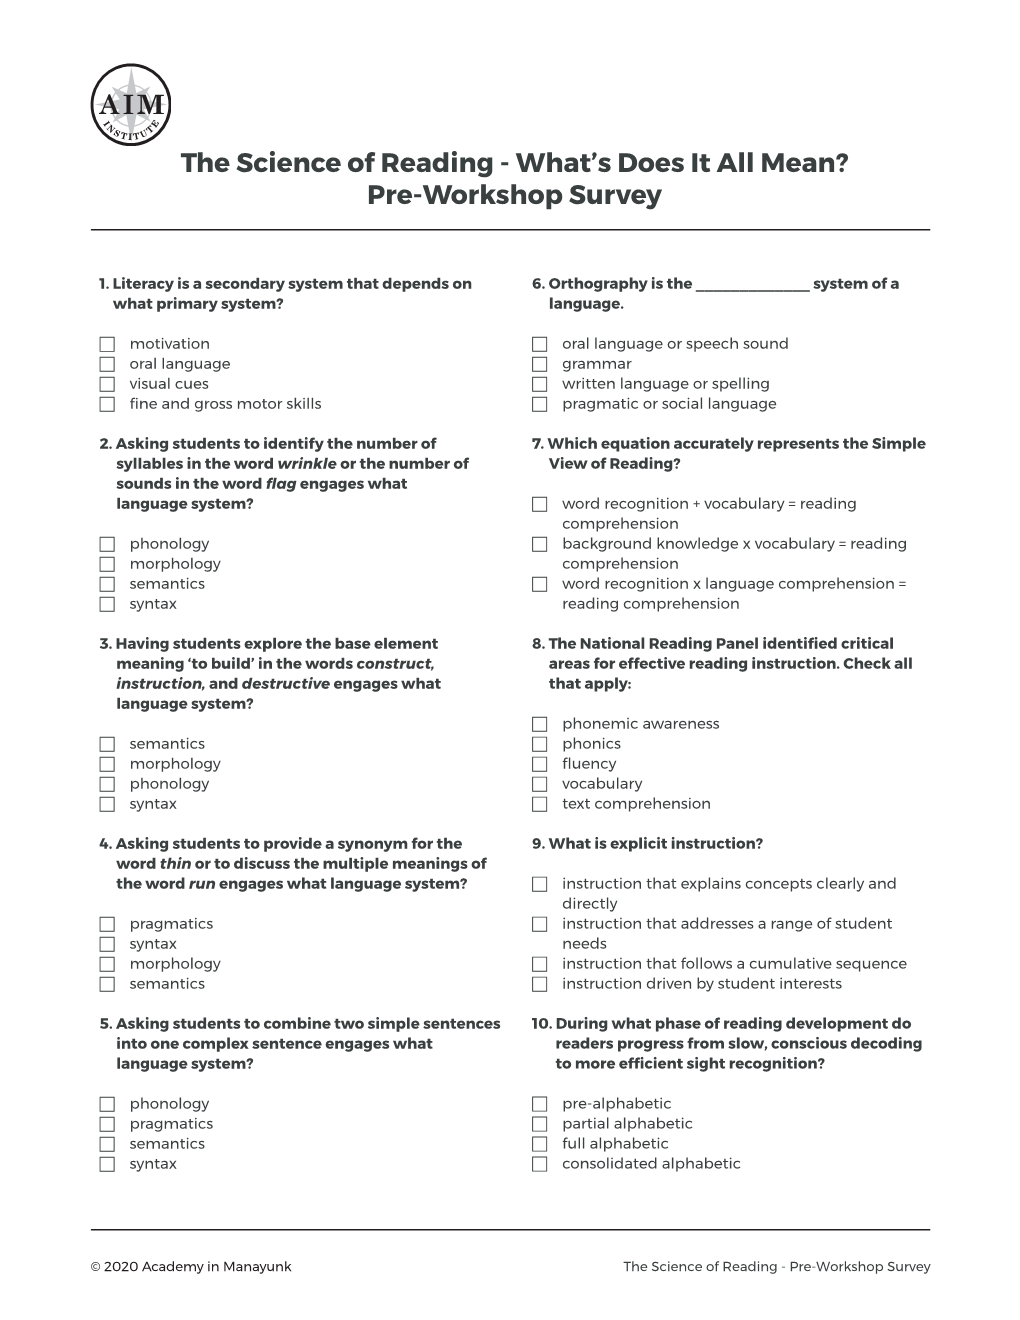 The Science of Reading - What’S Does It All Mean? Pre-Workshop Survey